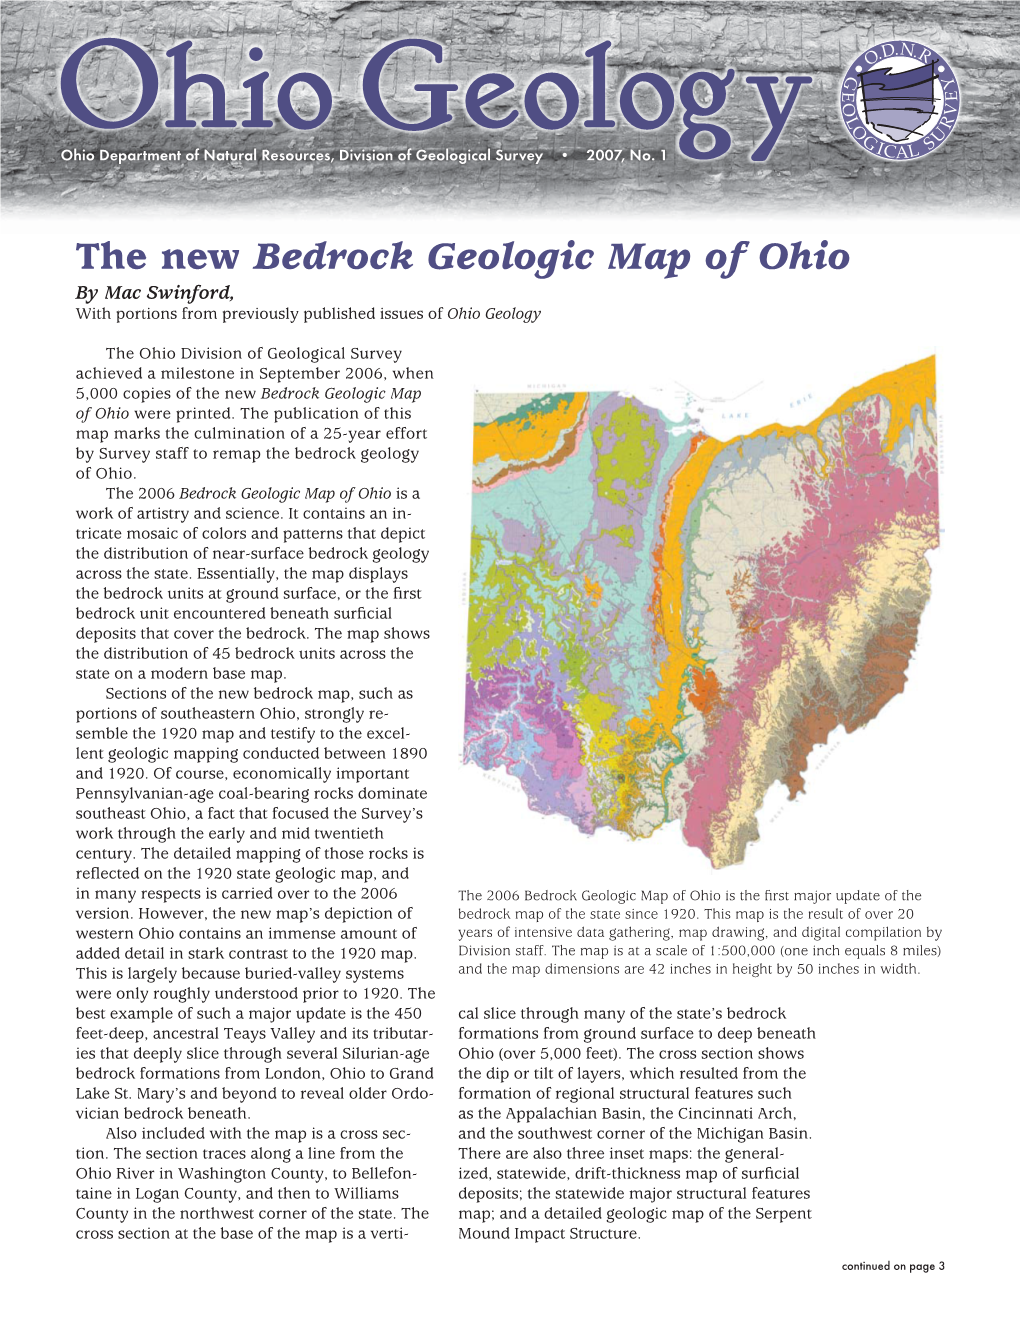 The New Bedrock Geologic Map of Ohio by Mac Swinford, with Portions from Previously Published Issues of Ohio Geology